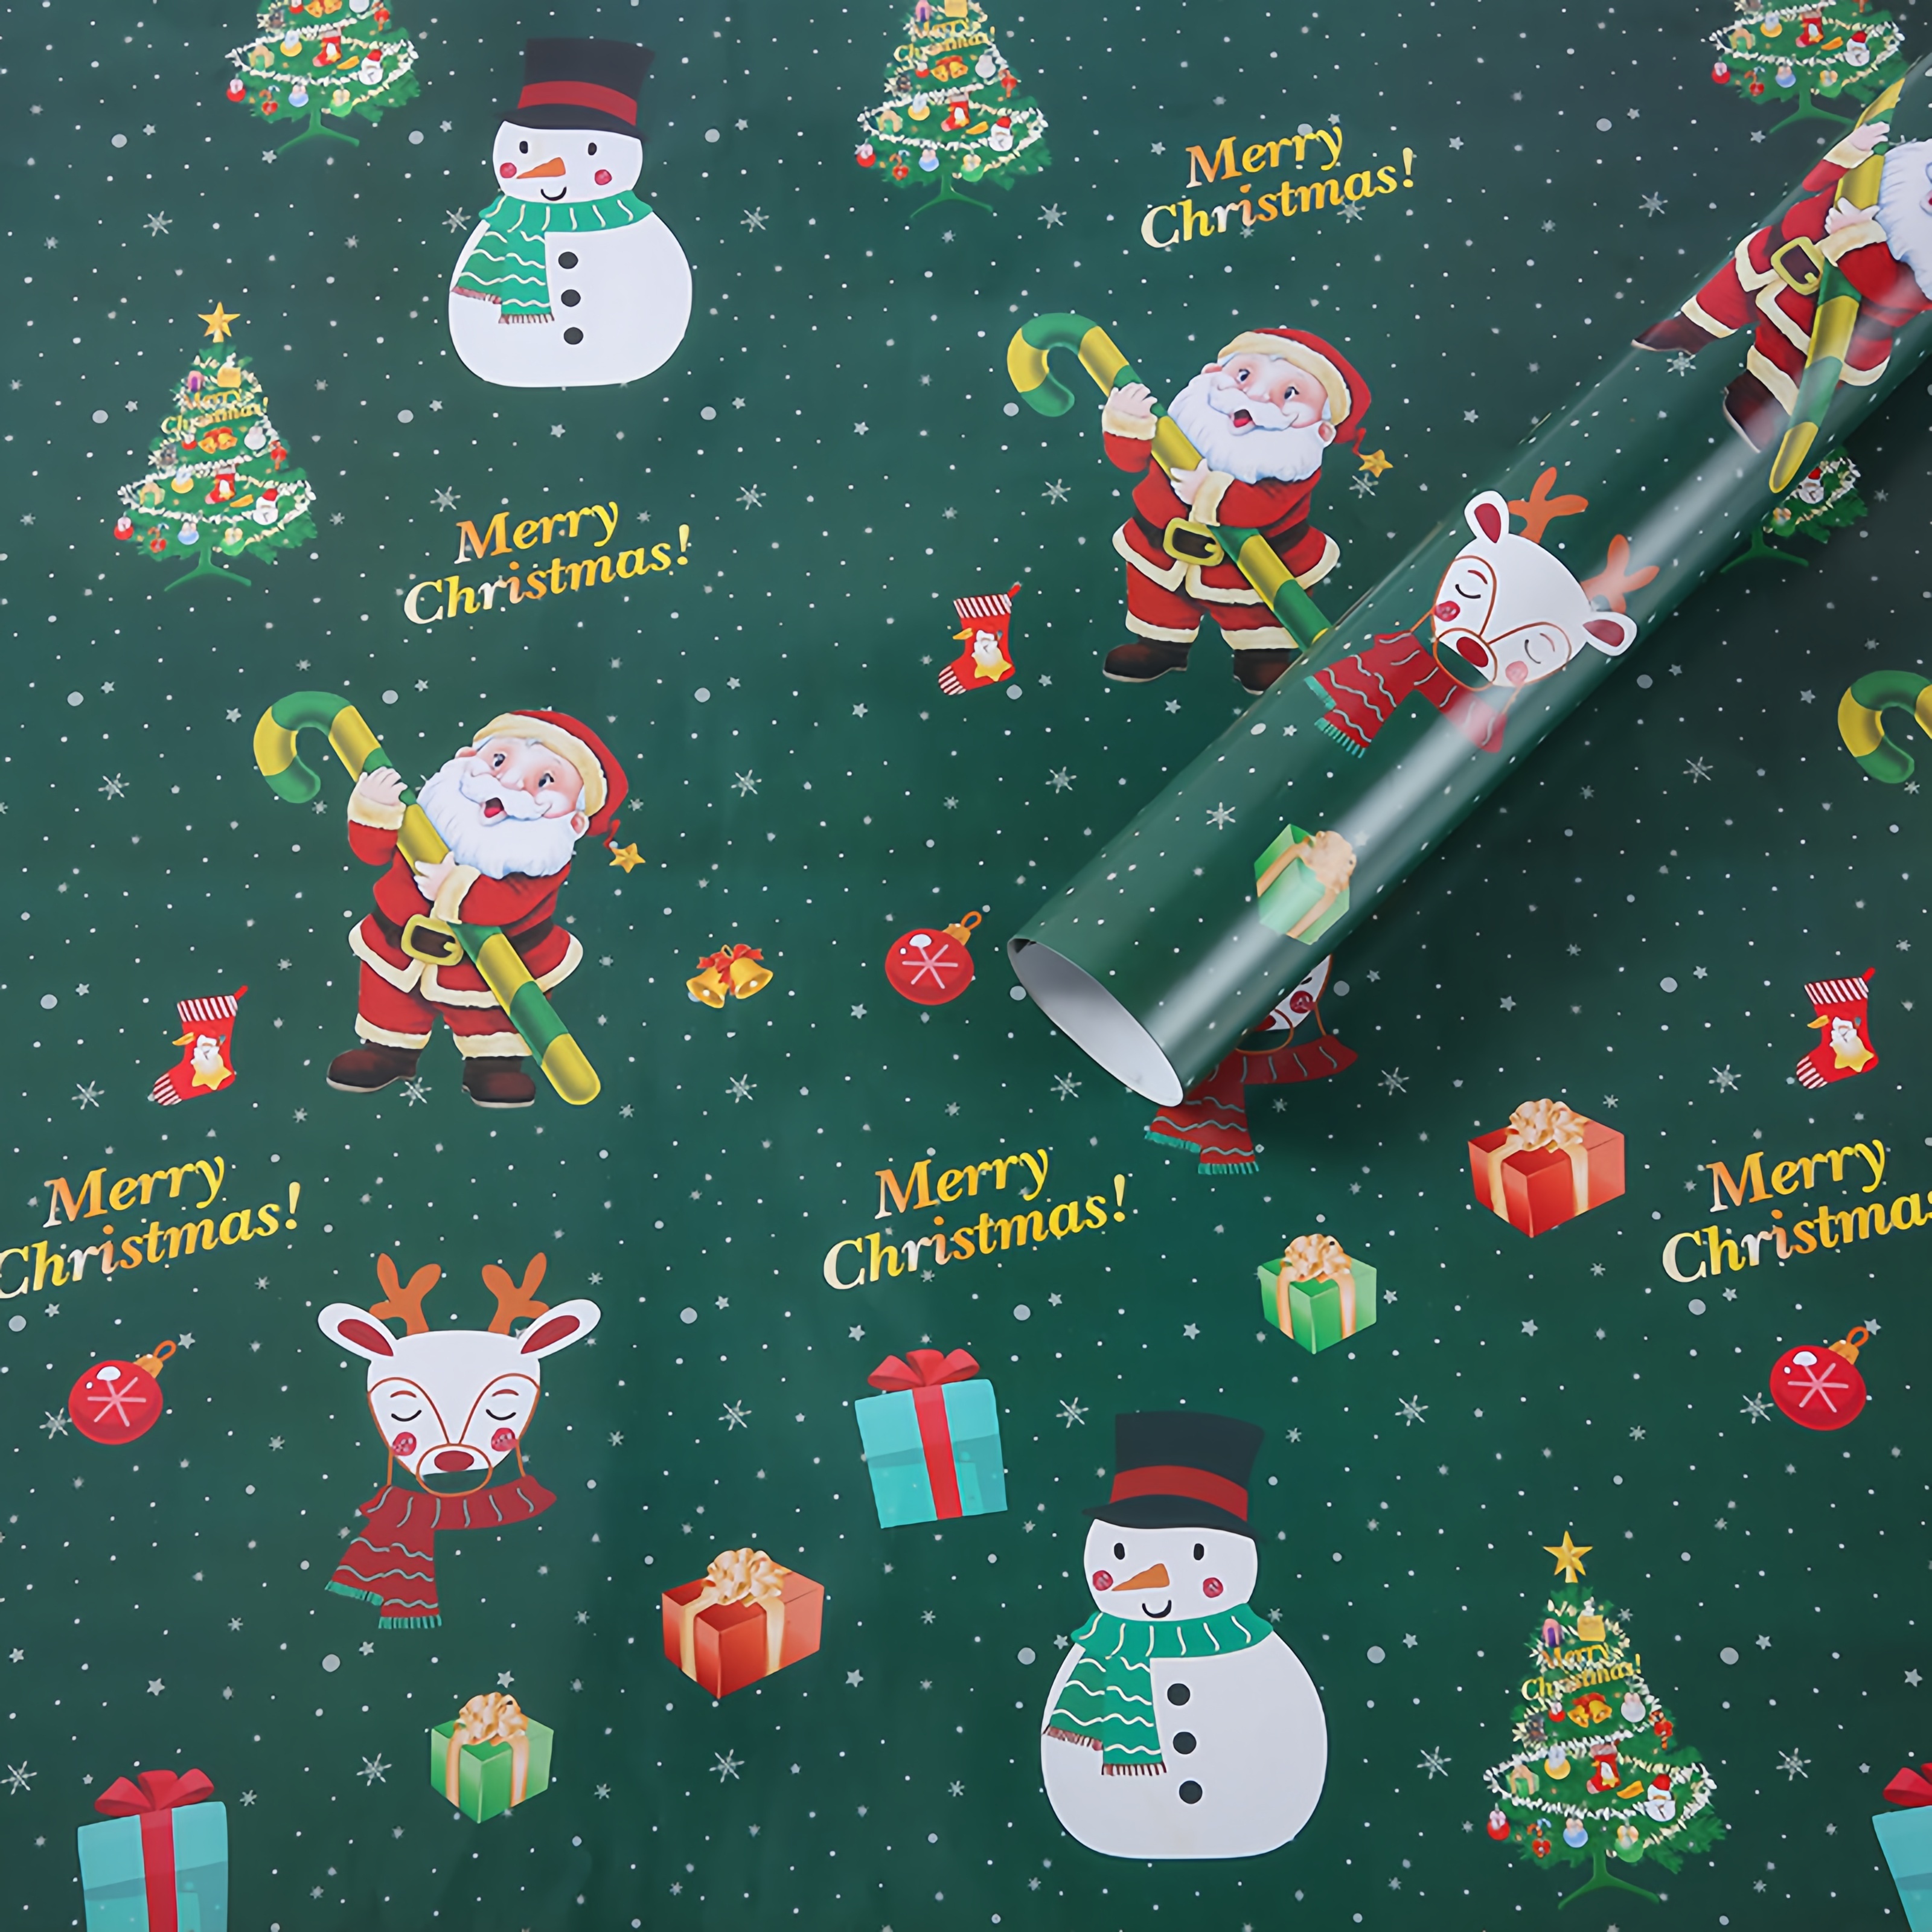 CHEERY SNOWFLAKES Tissue Paper Sheets Gift Present Wrapping Craft